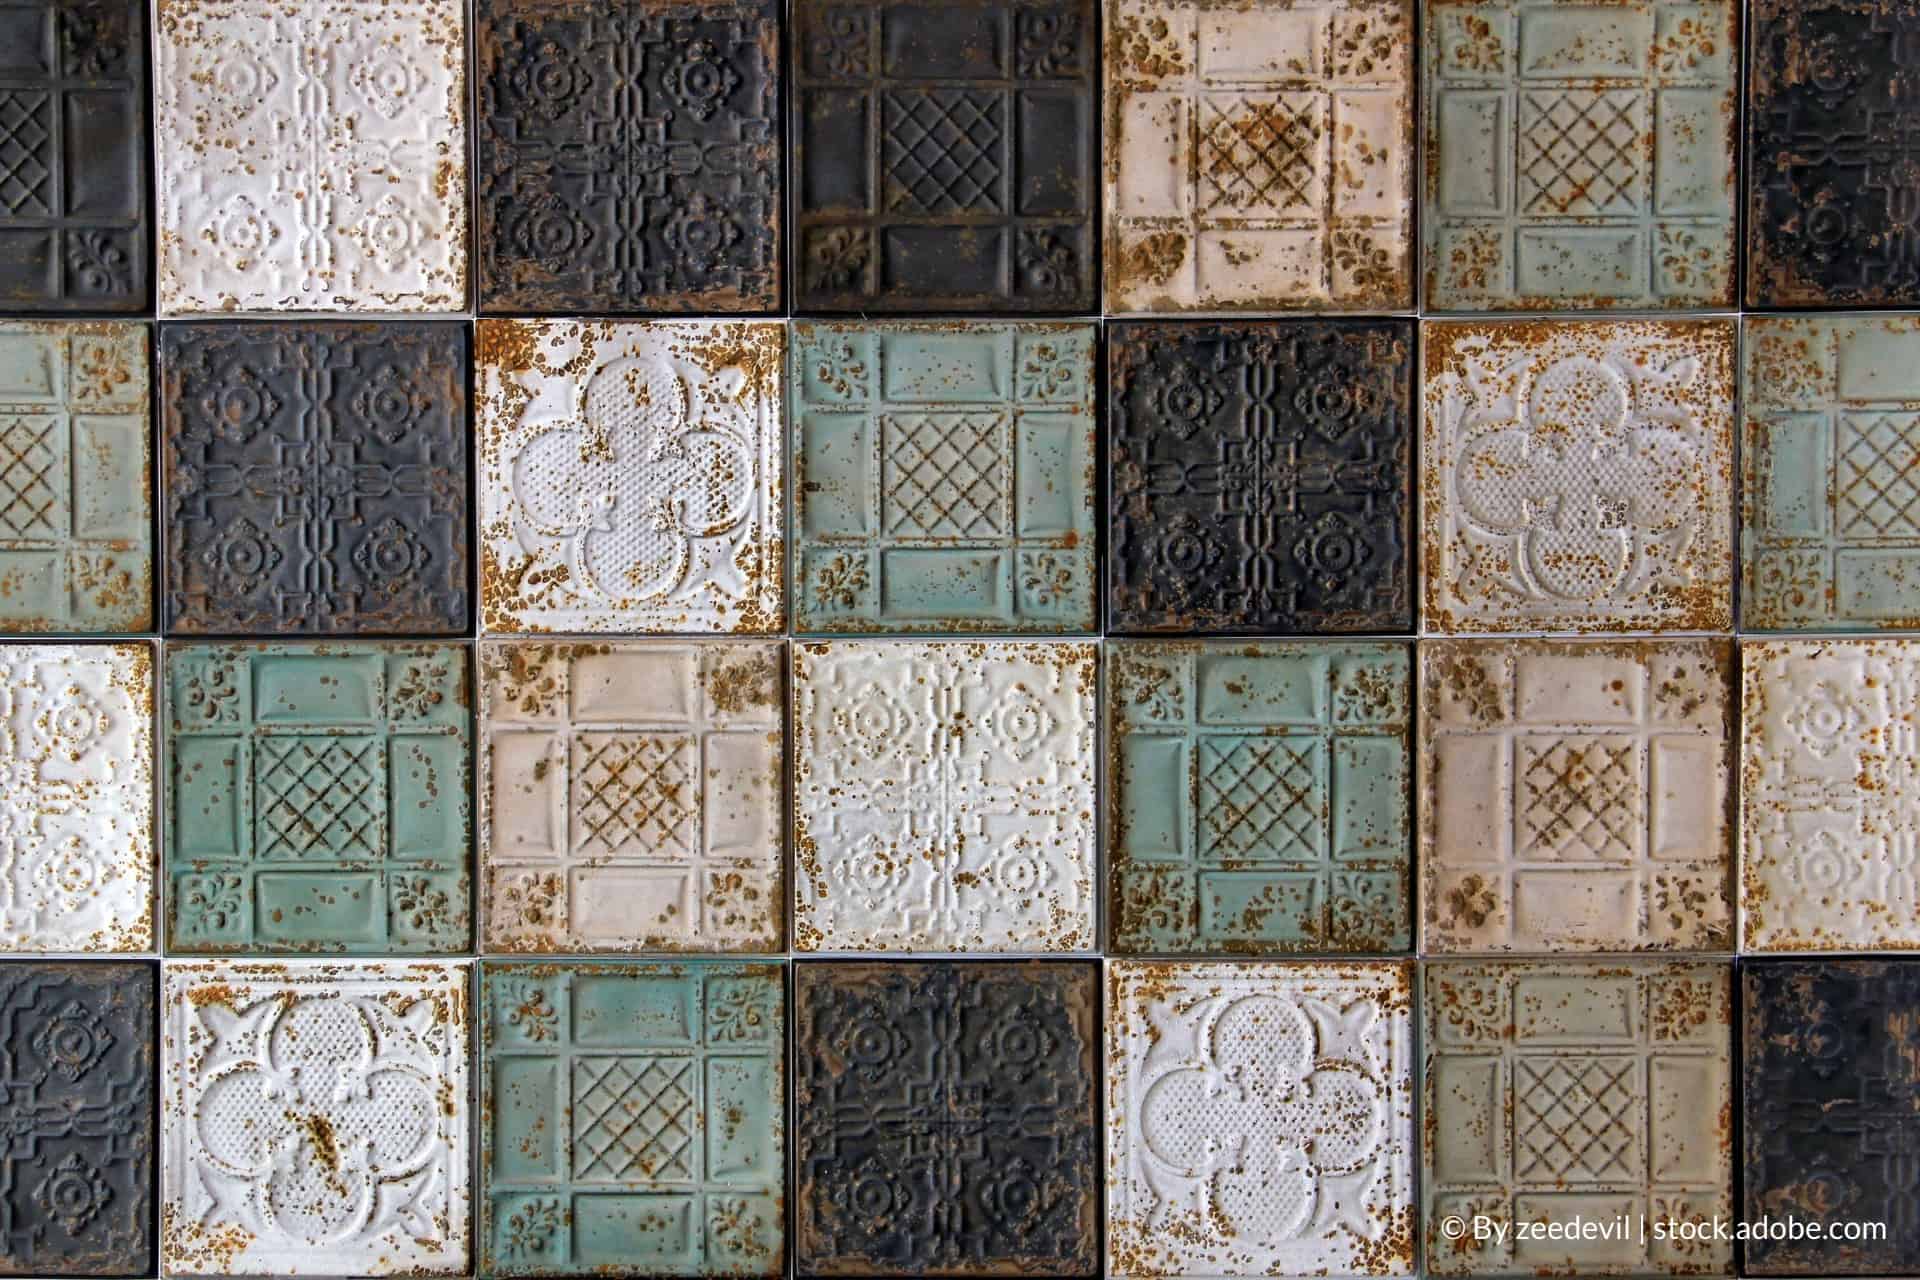 How to remove rust from tiles - WD-24 Gulf blog post